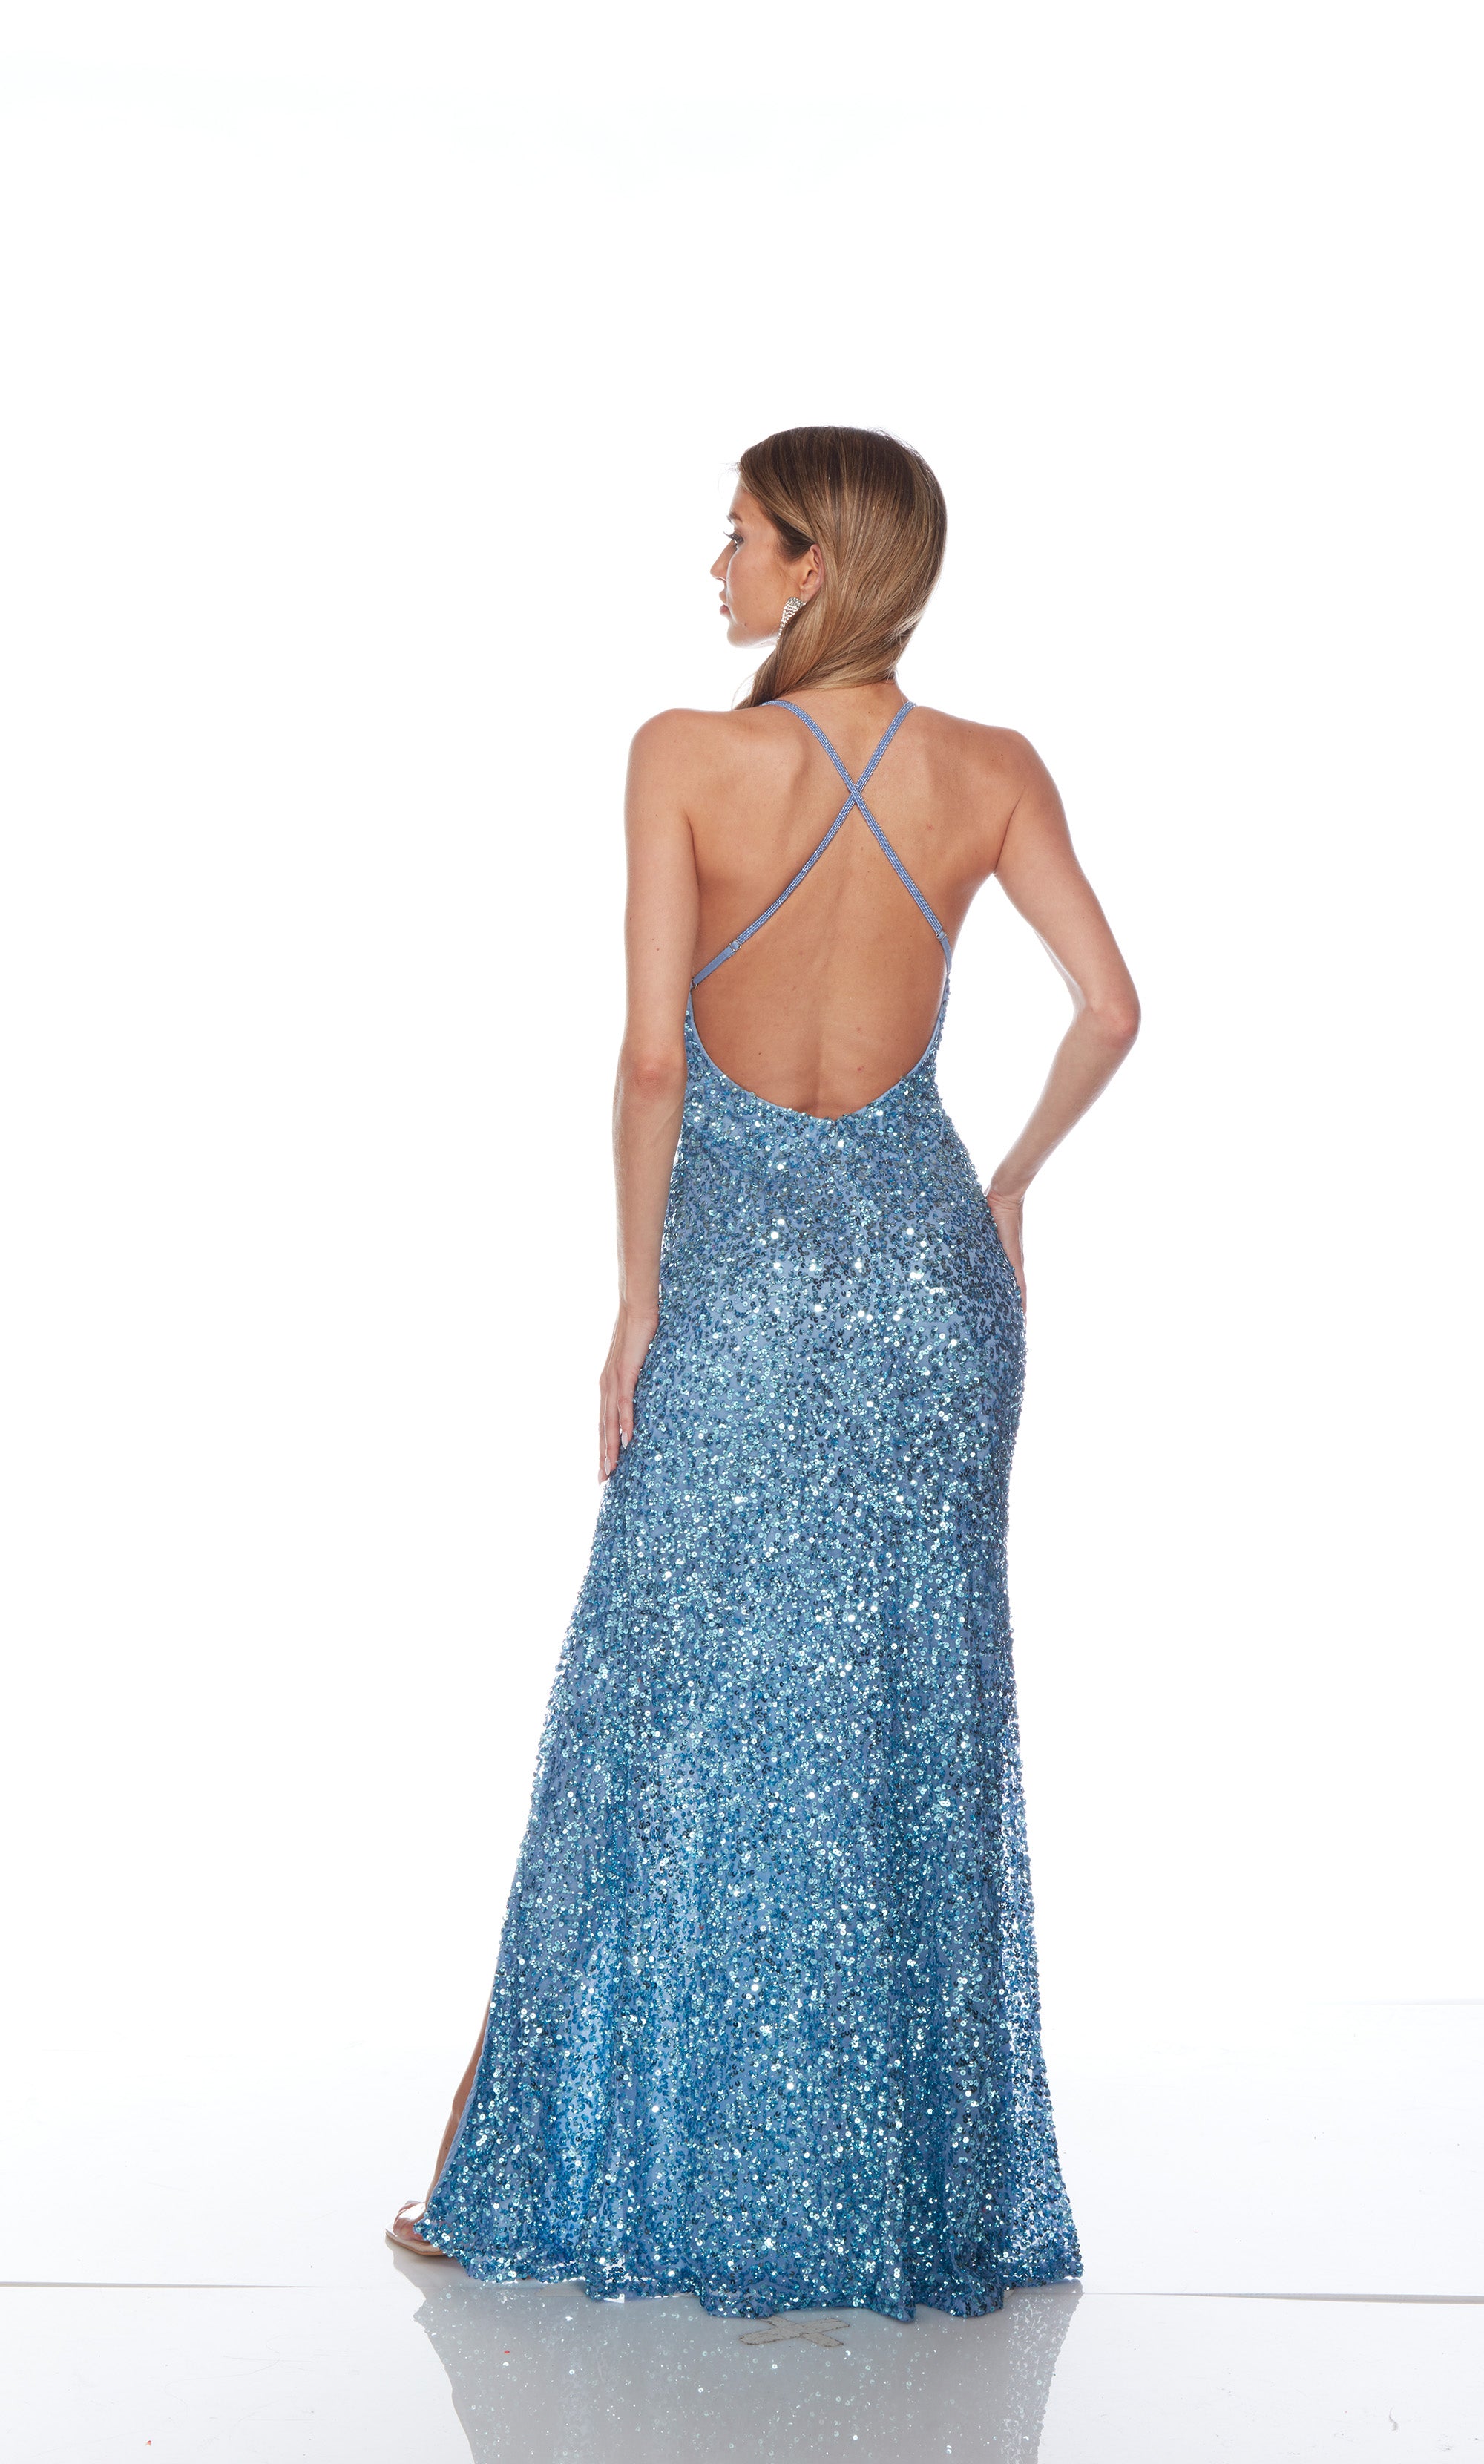 Blue sequin gown with an V neckline, slit, and crisscross adjustable strap back for an elegant and alluring look.